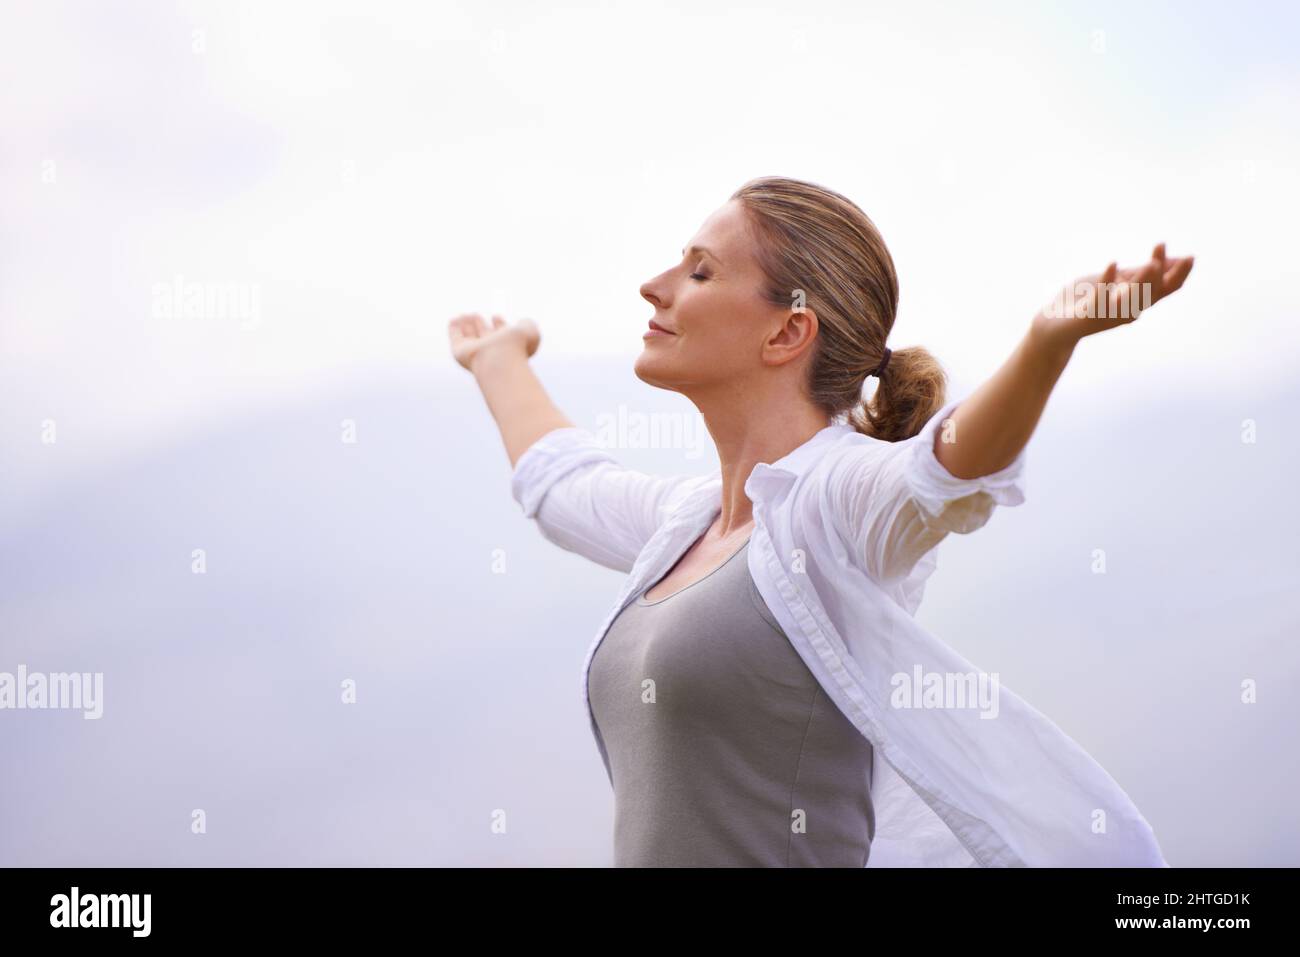 Feeling calm in nature. A woman doing yoga out. Stock Photo